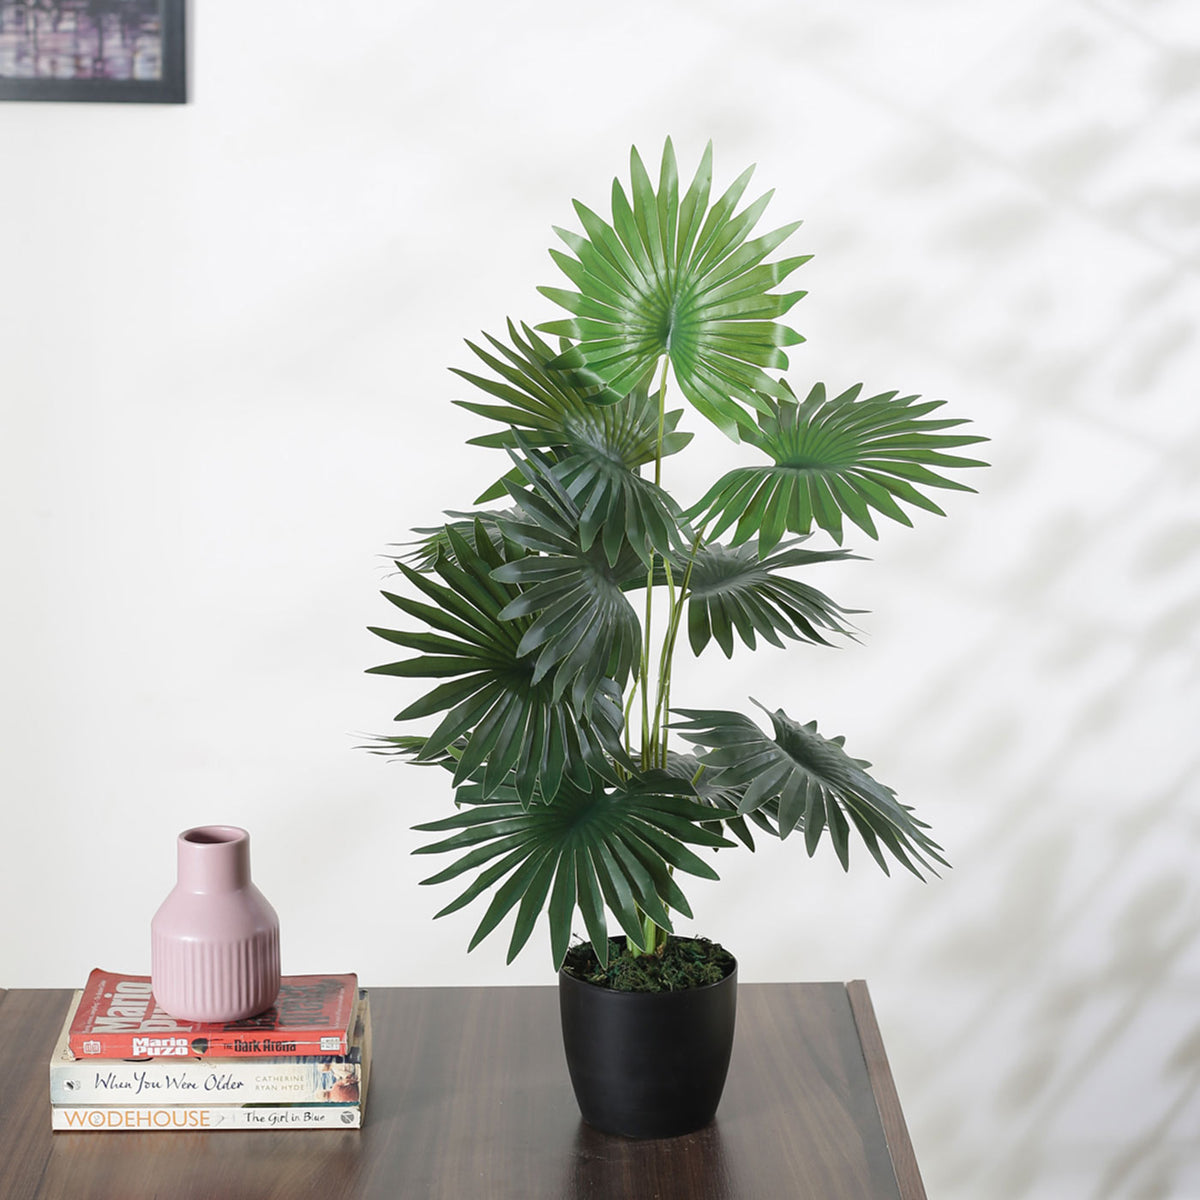 Artificial Palm Plant for Home Decor/Office Decor/Gifting | 12 Leaves | with Basic Black Pot | Natural Looking Indoor Plant (Green)